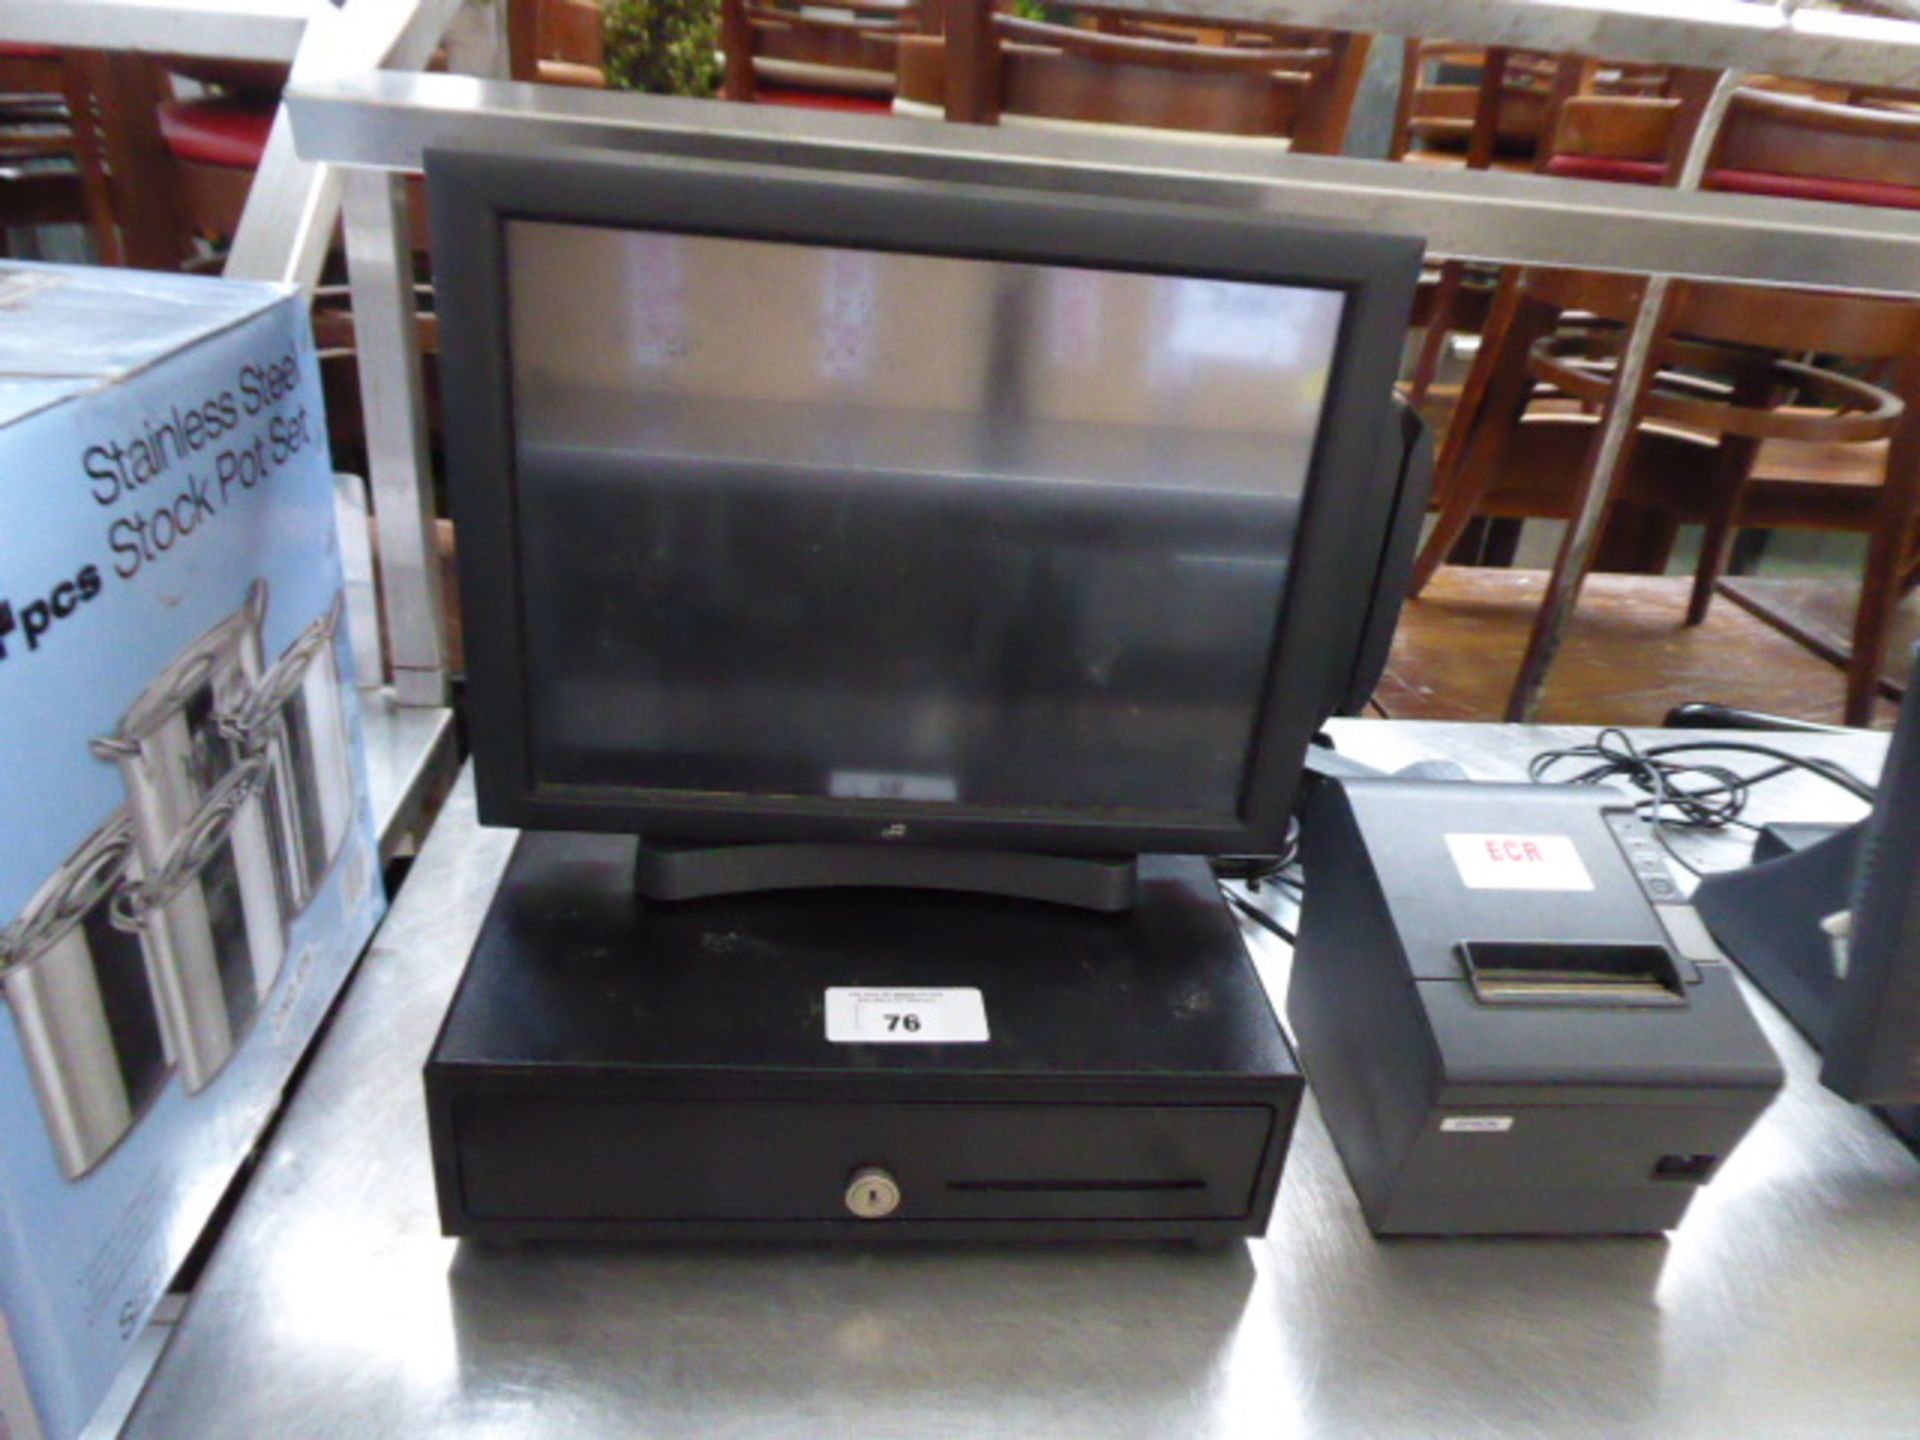 2 J2 electronic touchscreen till stations with 1 cash drawer and 2 printers - Image 4 of 4